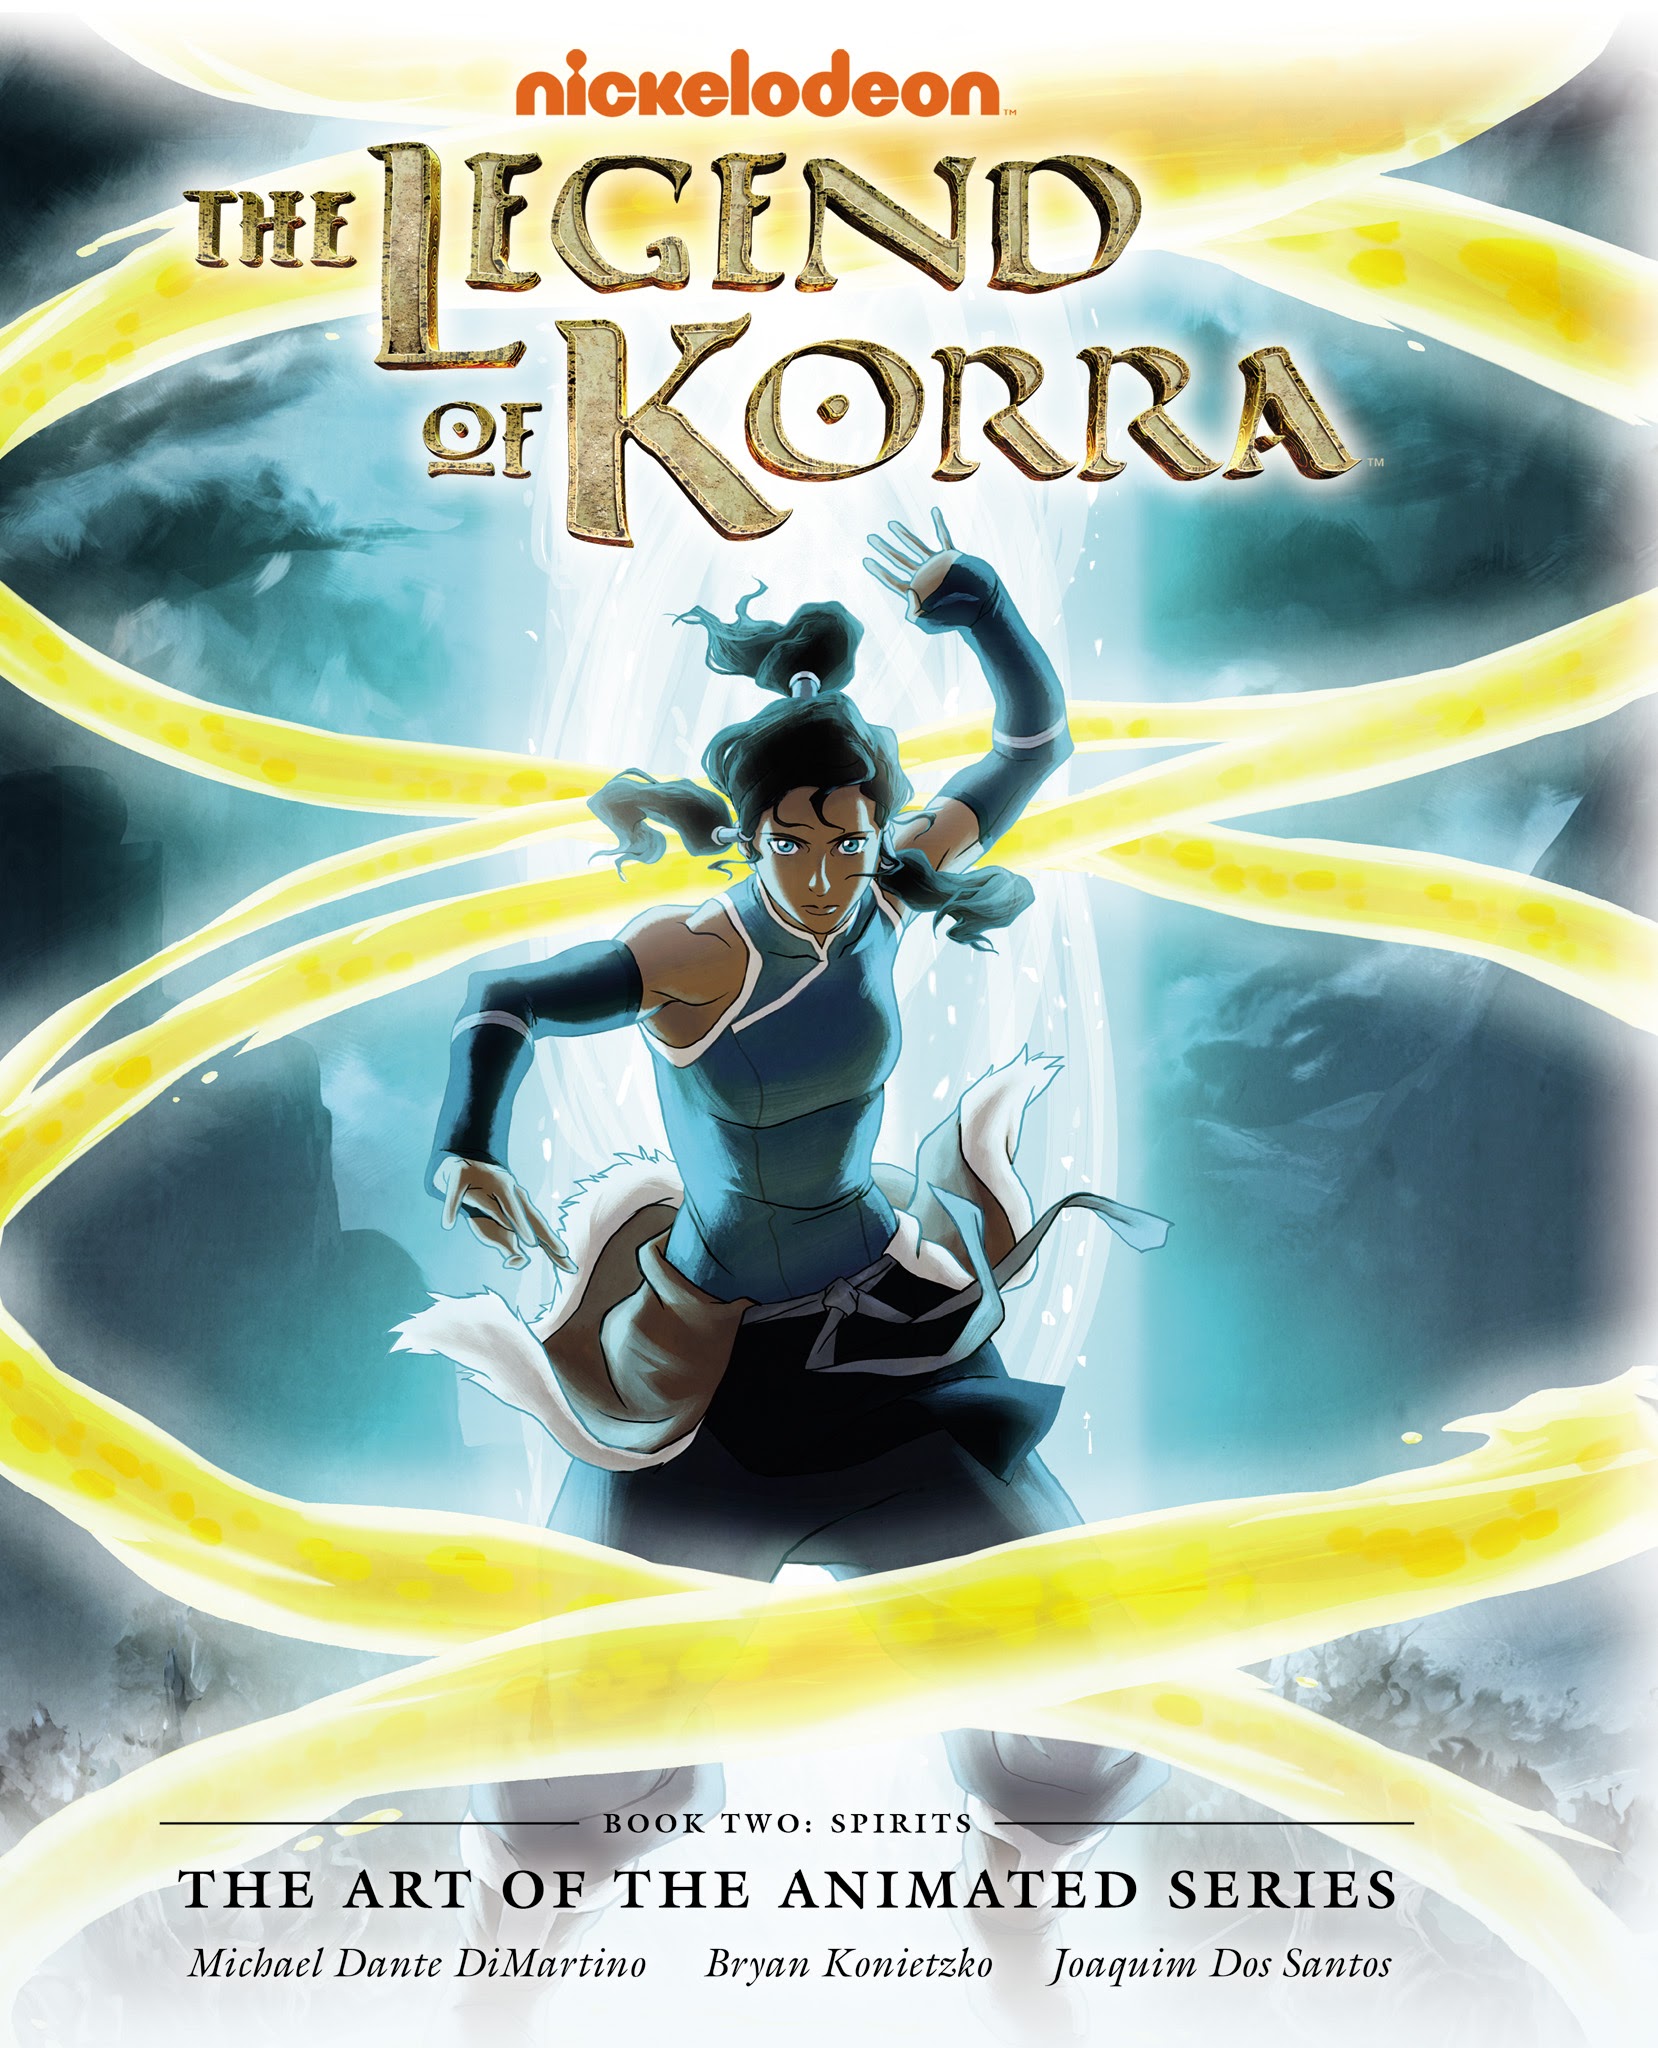 Read online The Legend of Korra: The Art of the Animated Series comic -  Issue # TPB 2 - 1